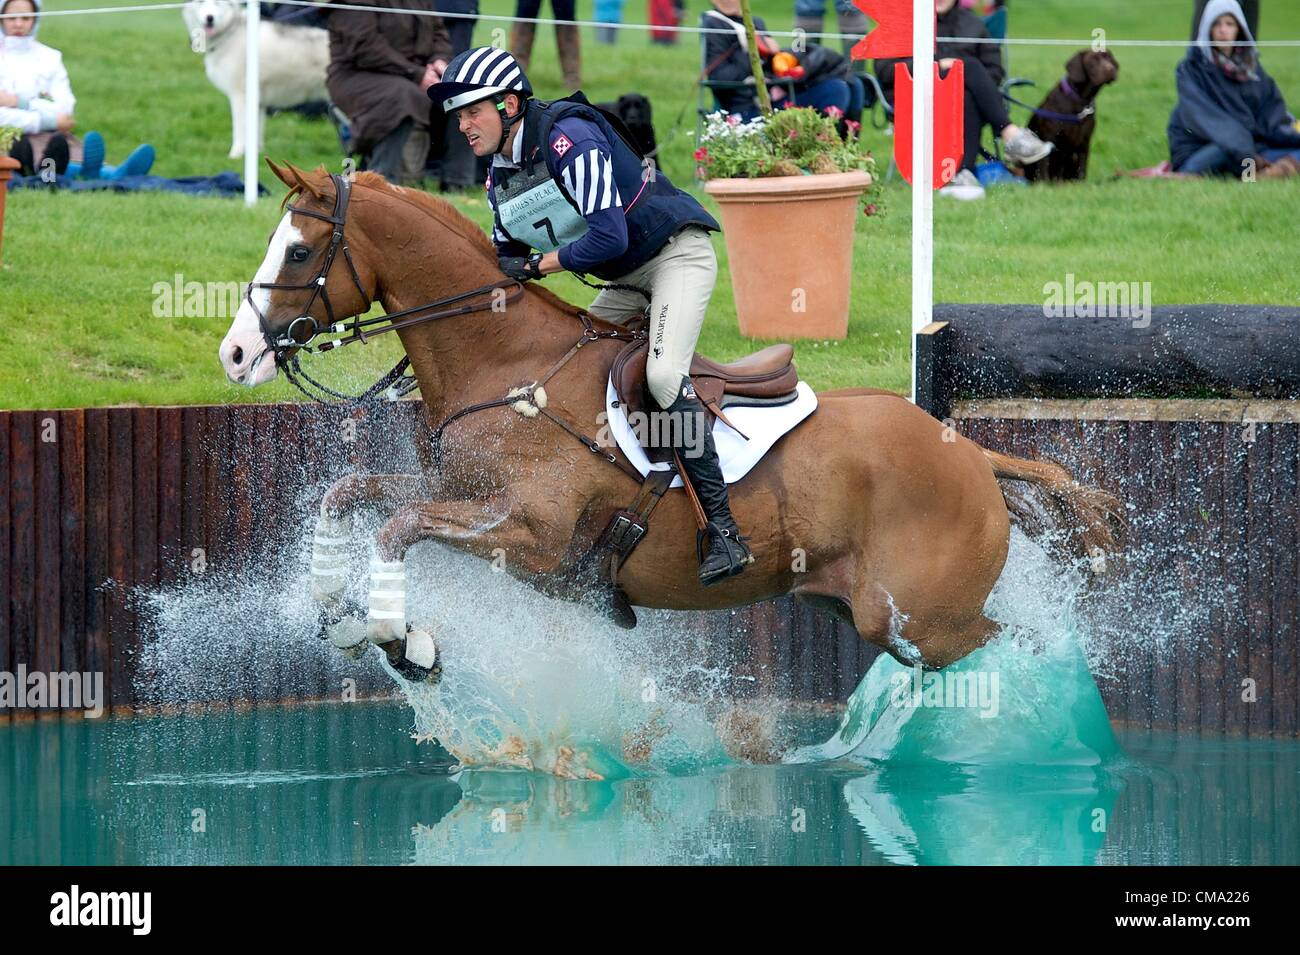 01.07.2012 Barbury Castle International Horse Trials, Marlborough, England. America's Boyd Martin riding Neville Bardos enters the water during the CIC*** Cross Country. Stock Photo